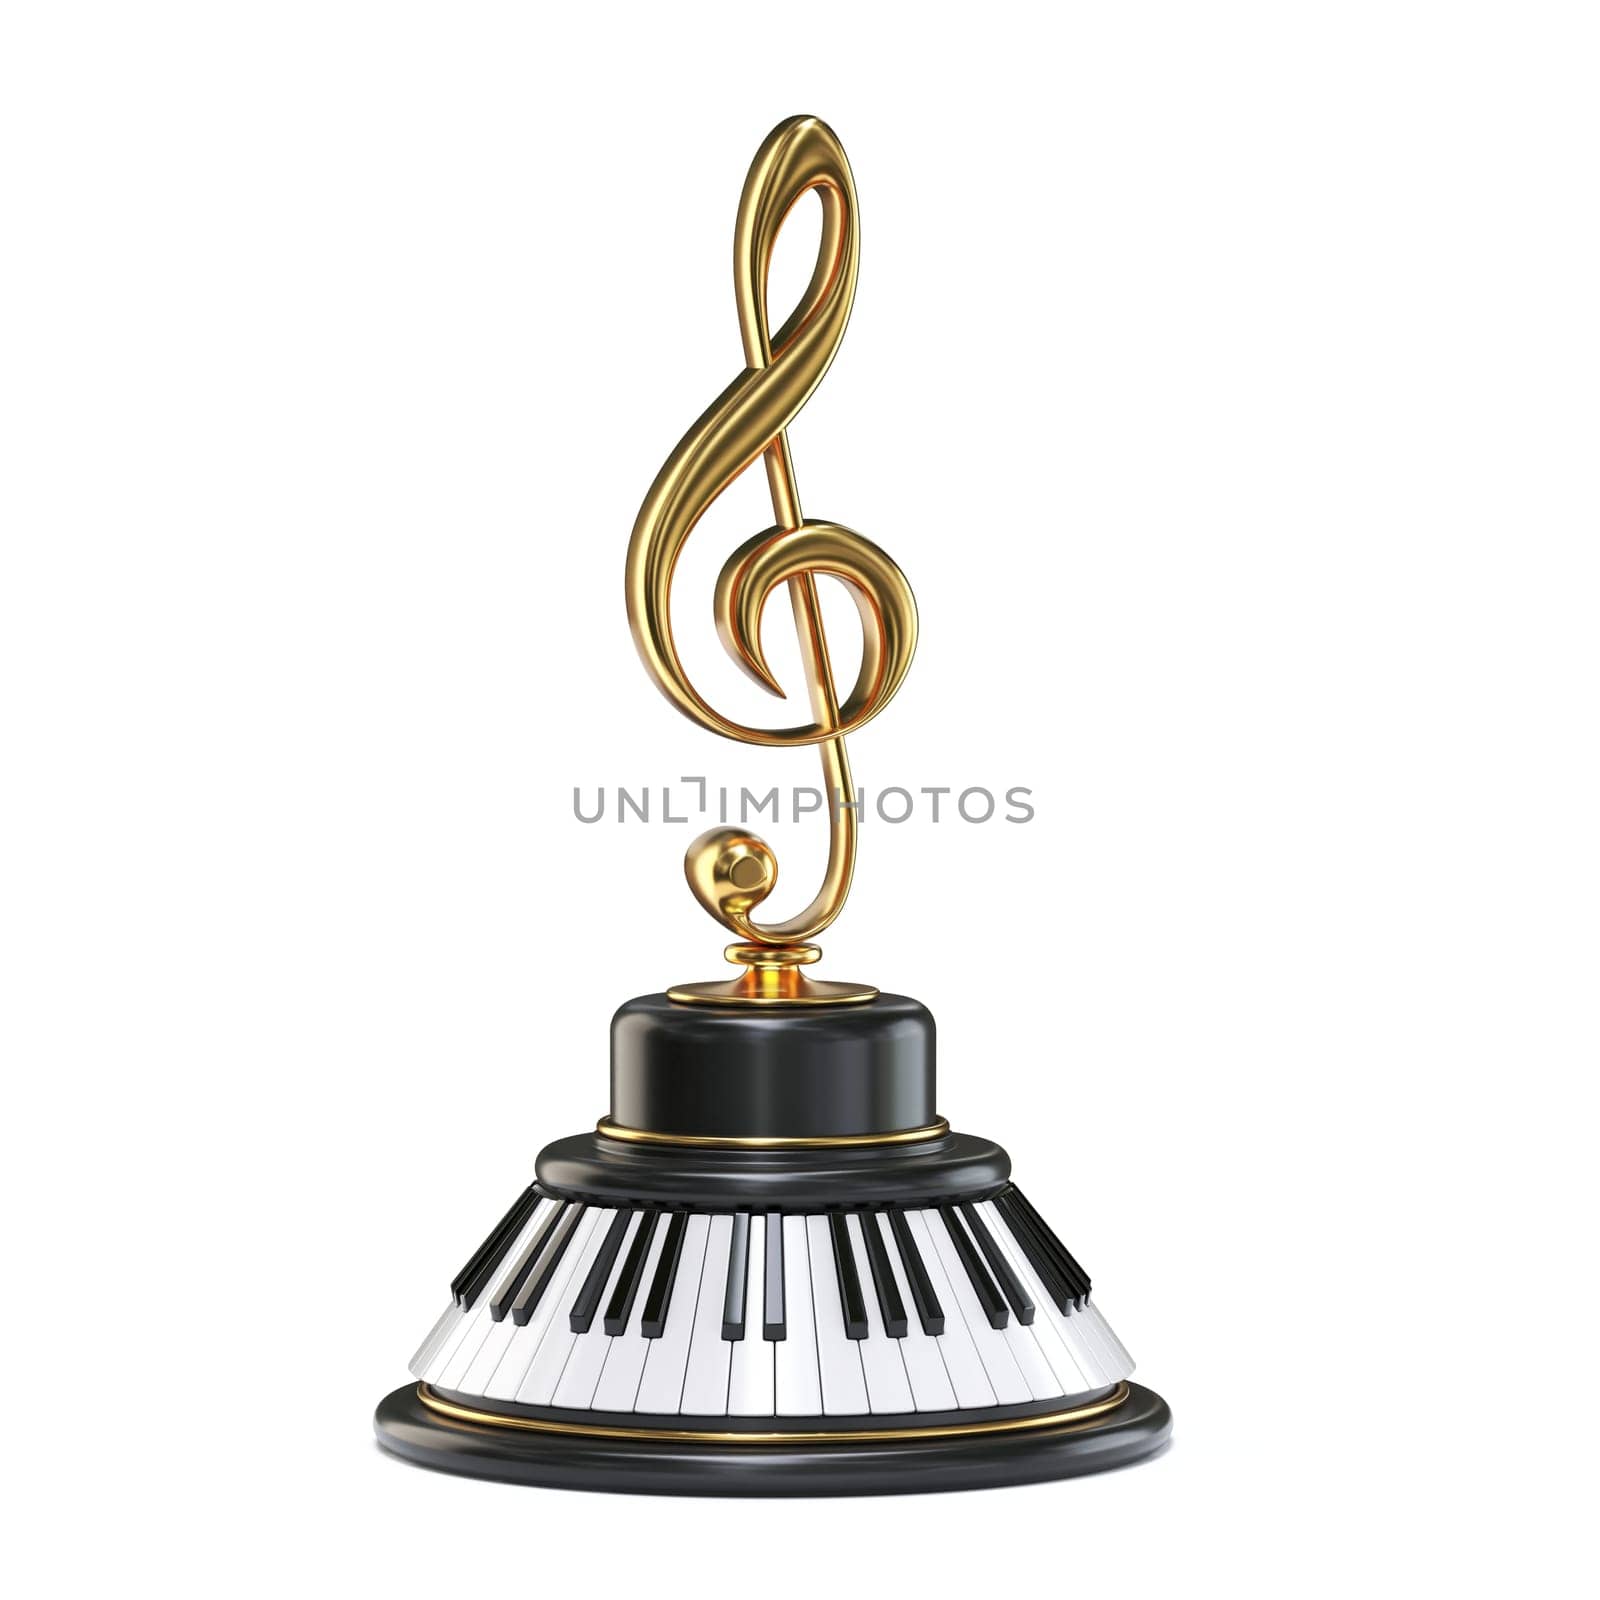 Piano keyboard with golden treble clef Music award 3D rendering illustration isolated on white background